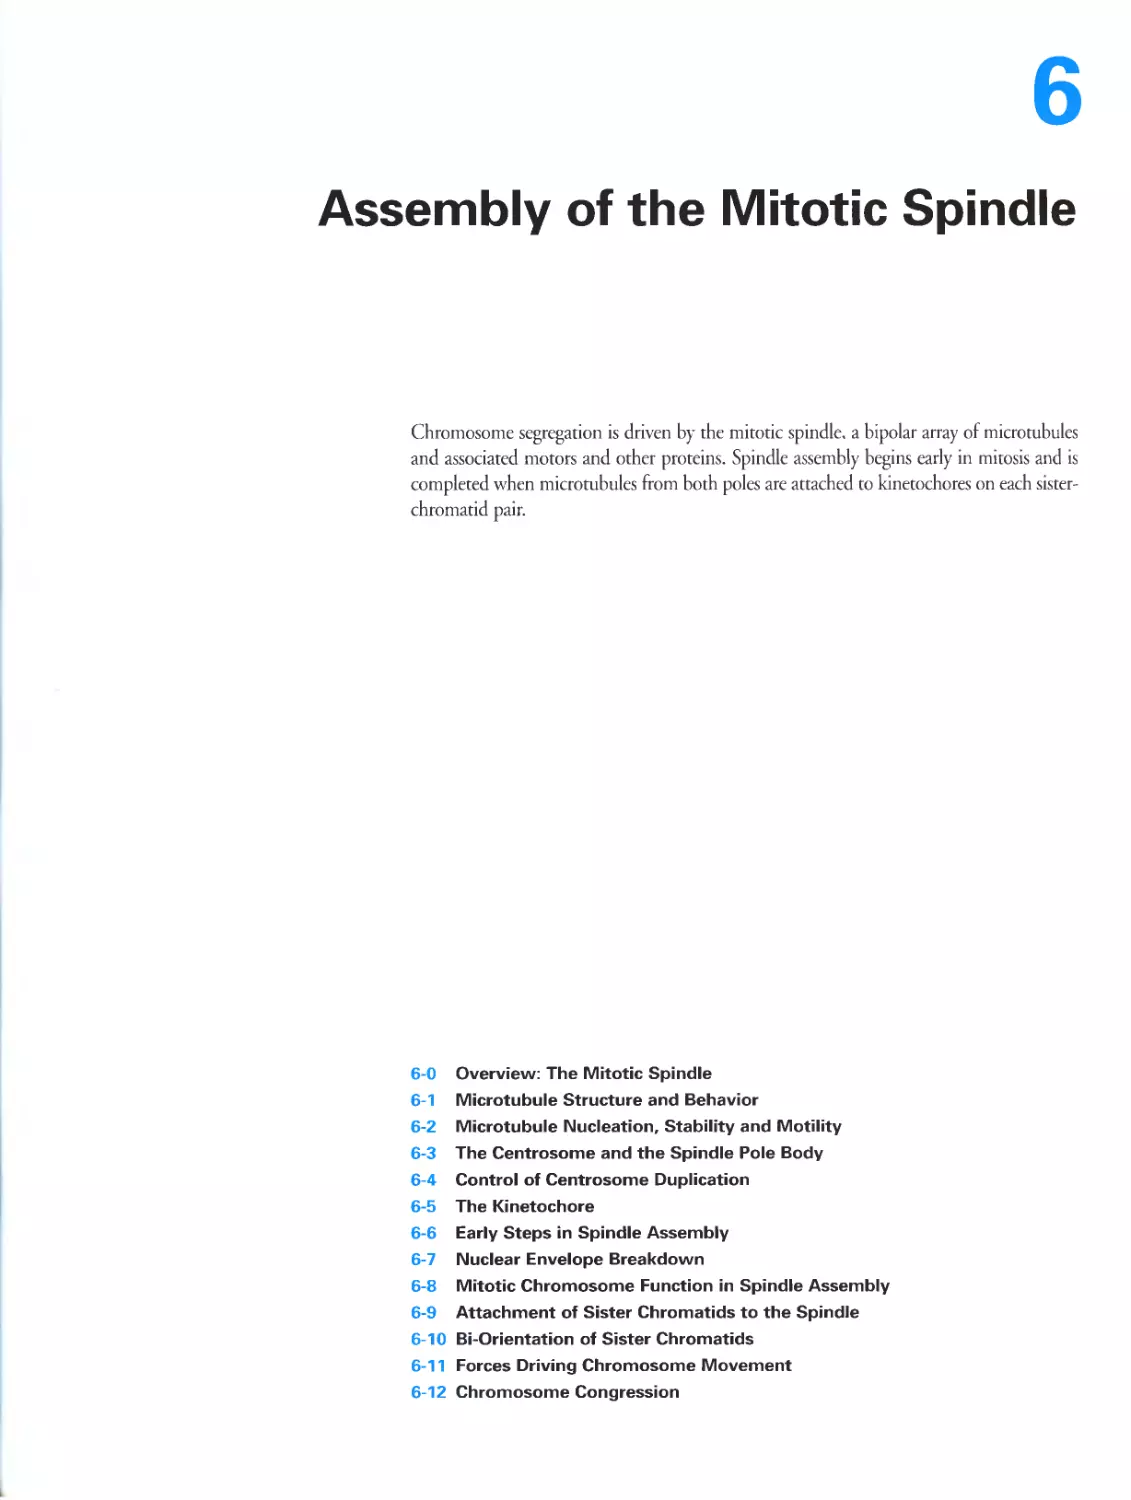 Chapter 6. Assembly of the Mitotic Spindle